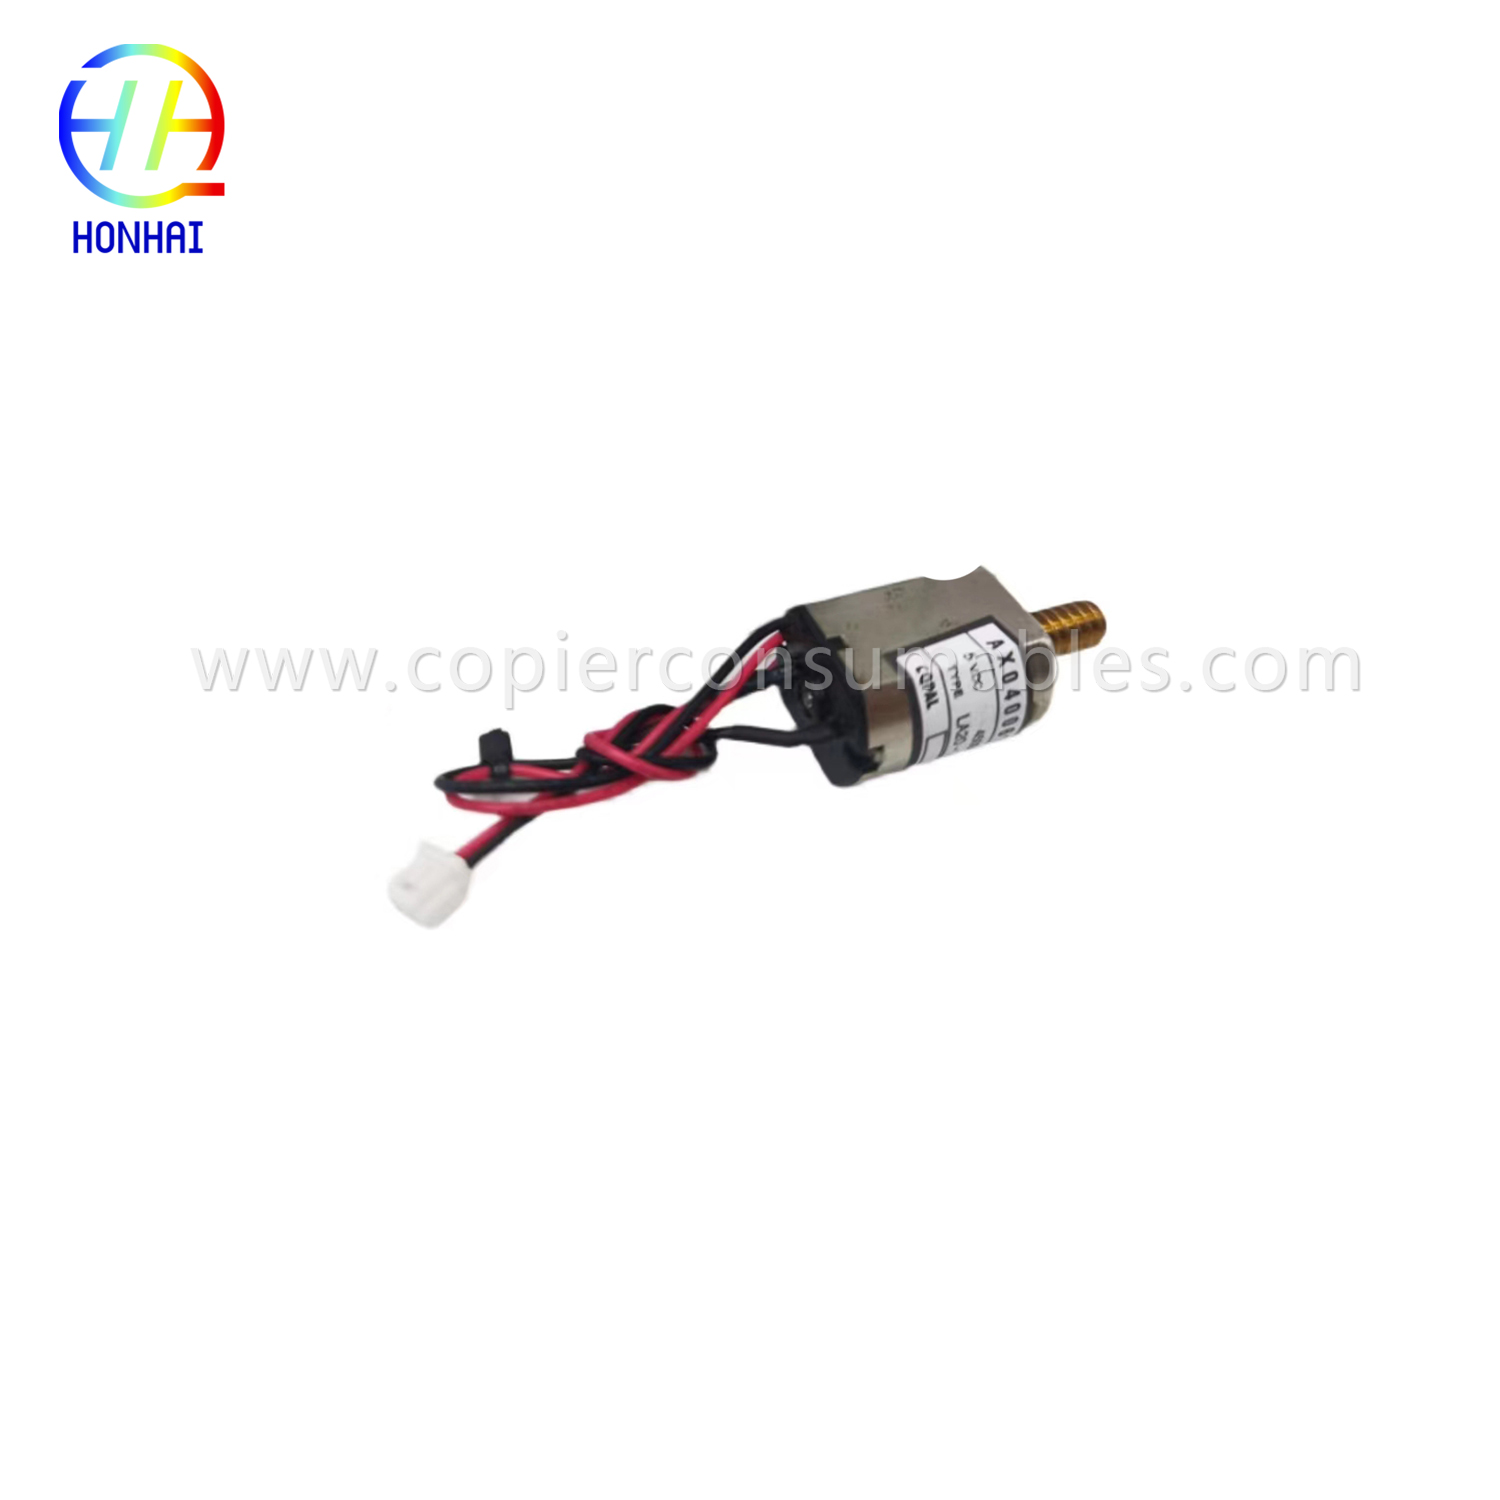 Ricoh Ax040159 සඳහා Fuser Cleaning Web Motor